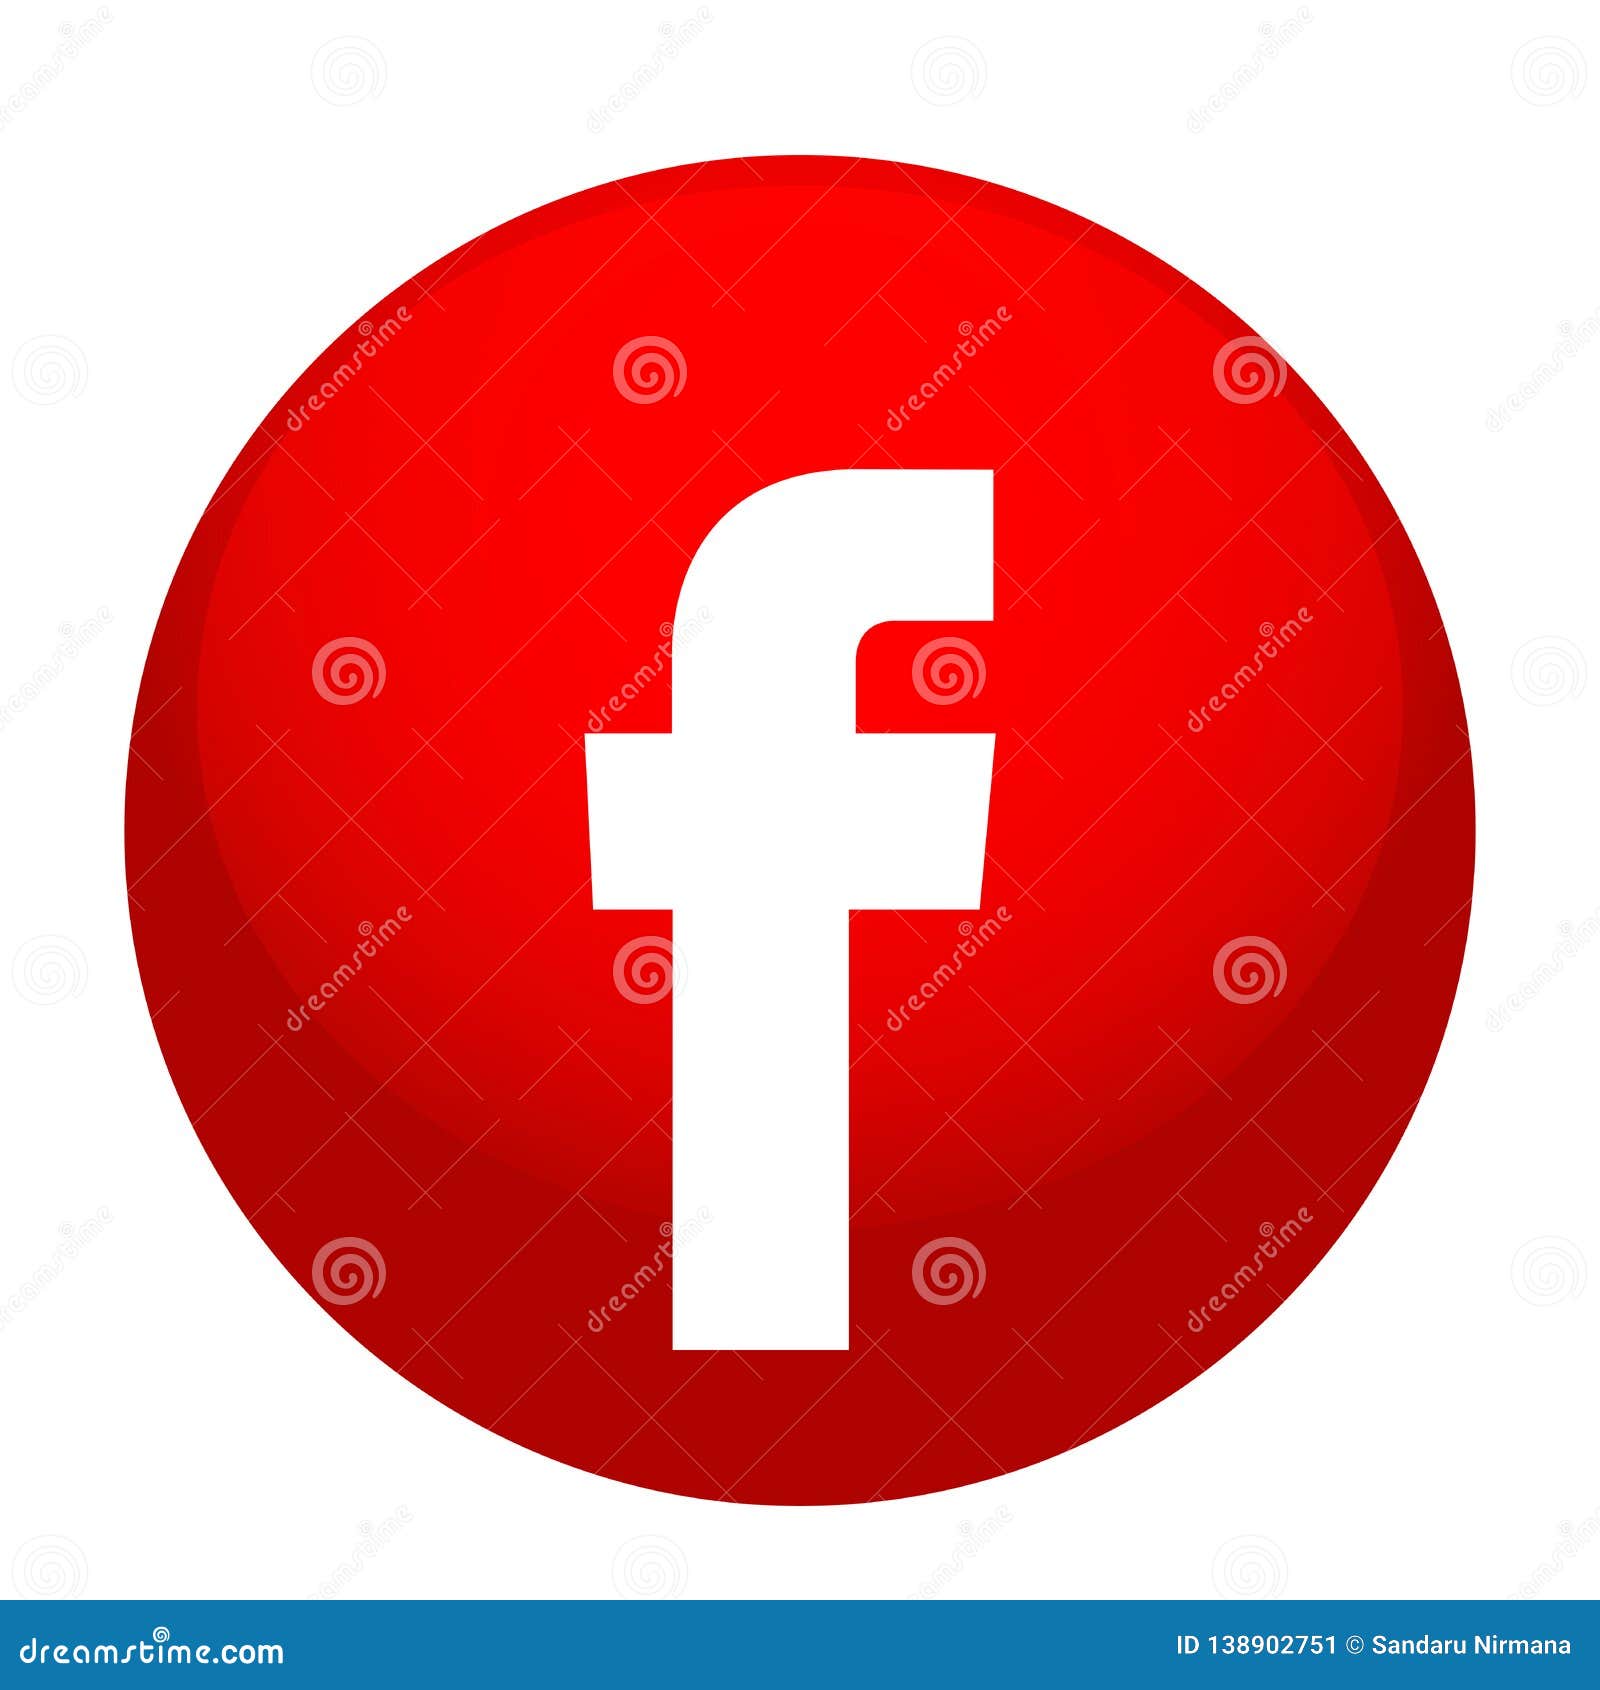 Facebook Logo Icon Vector In Red Illustrations On White Background Editorial Photo Illustration Of Connection Buttons